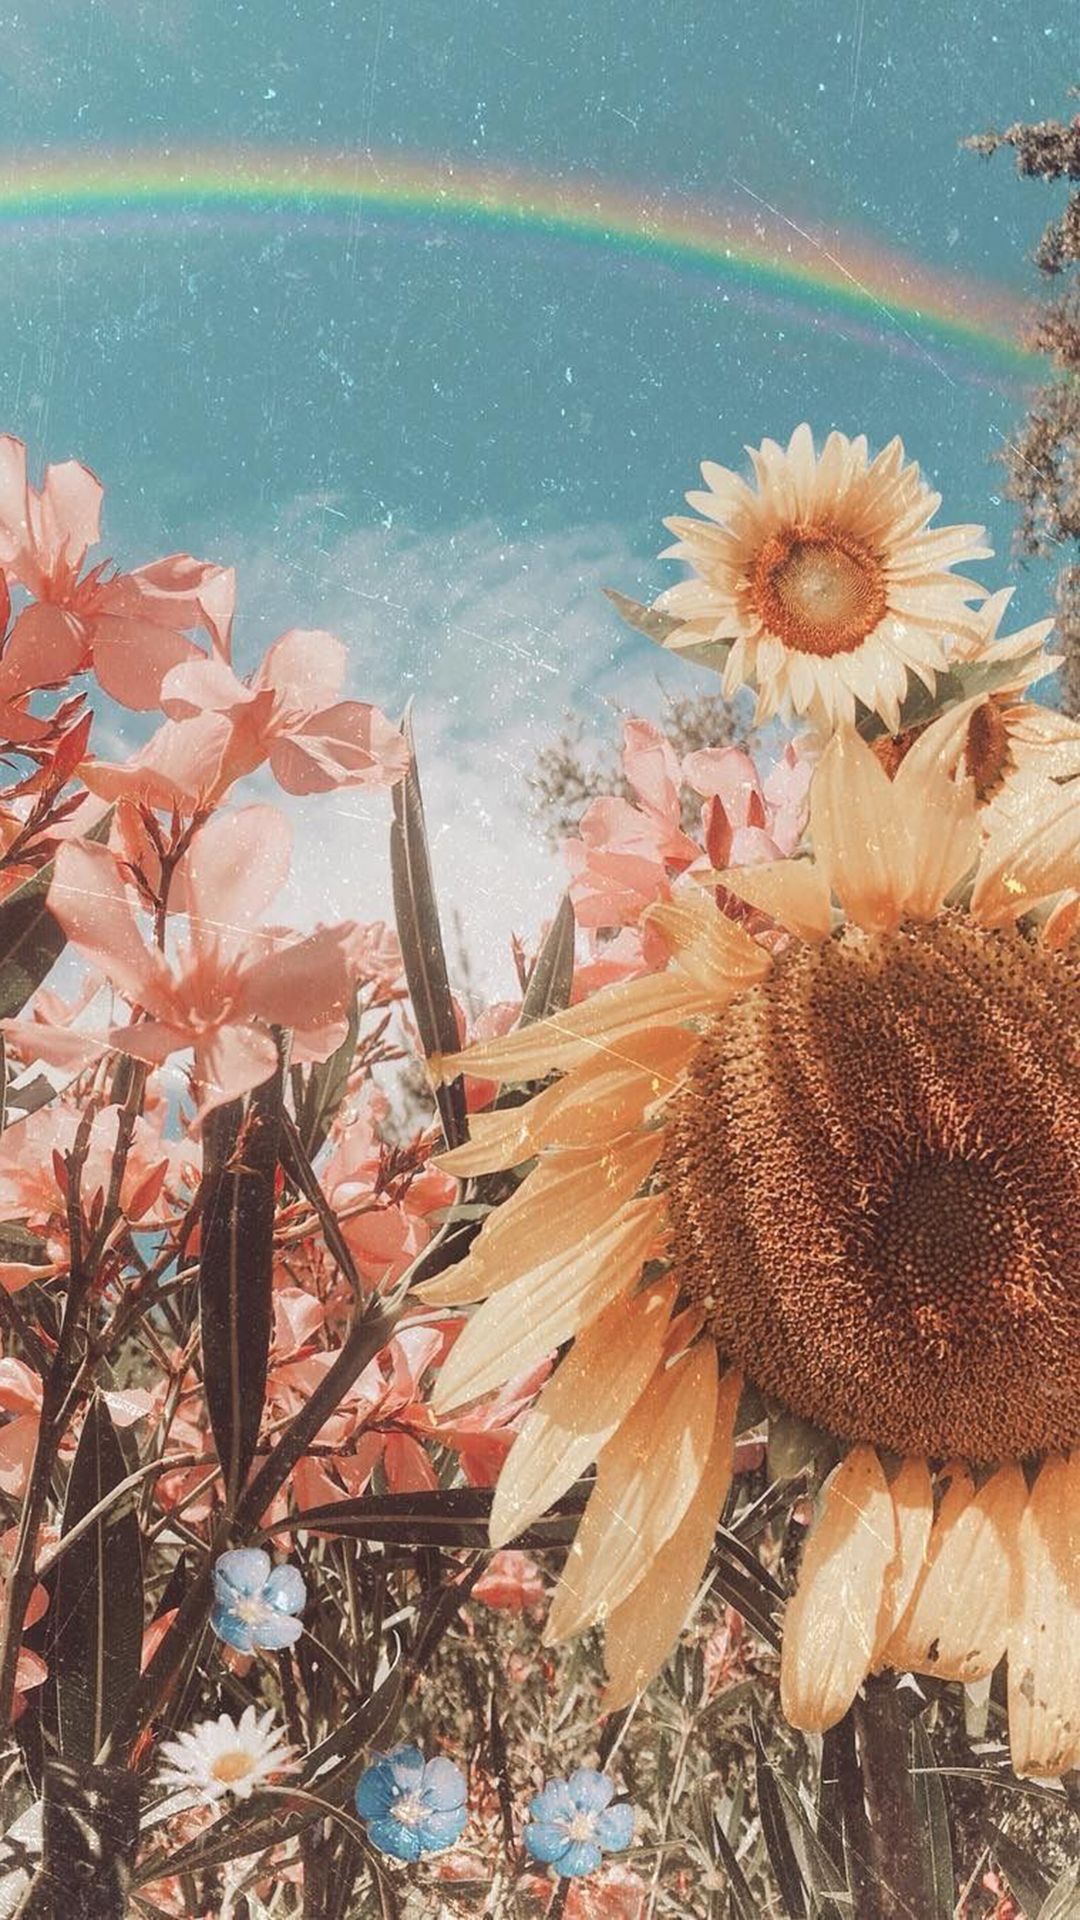 Aesthetic Boho Wallpaper HD. Sunflowers and wild flowers. Vintage aesthetic